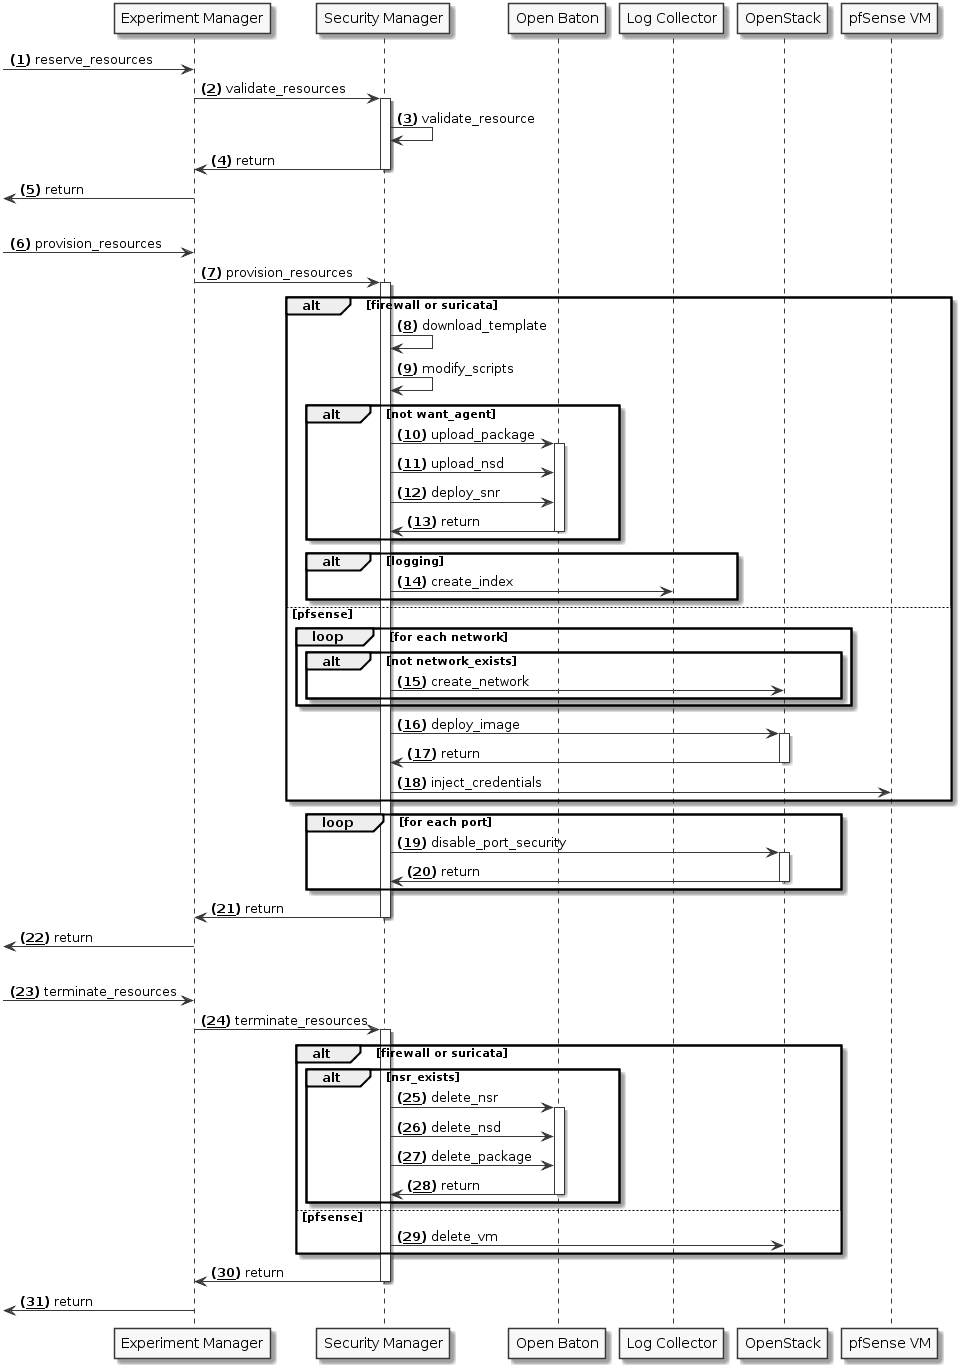 Security Manager sequence diagram